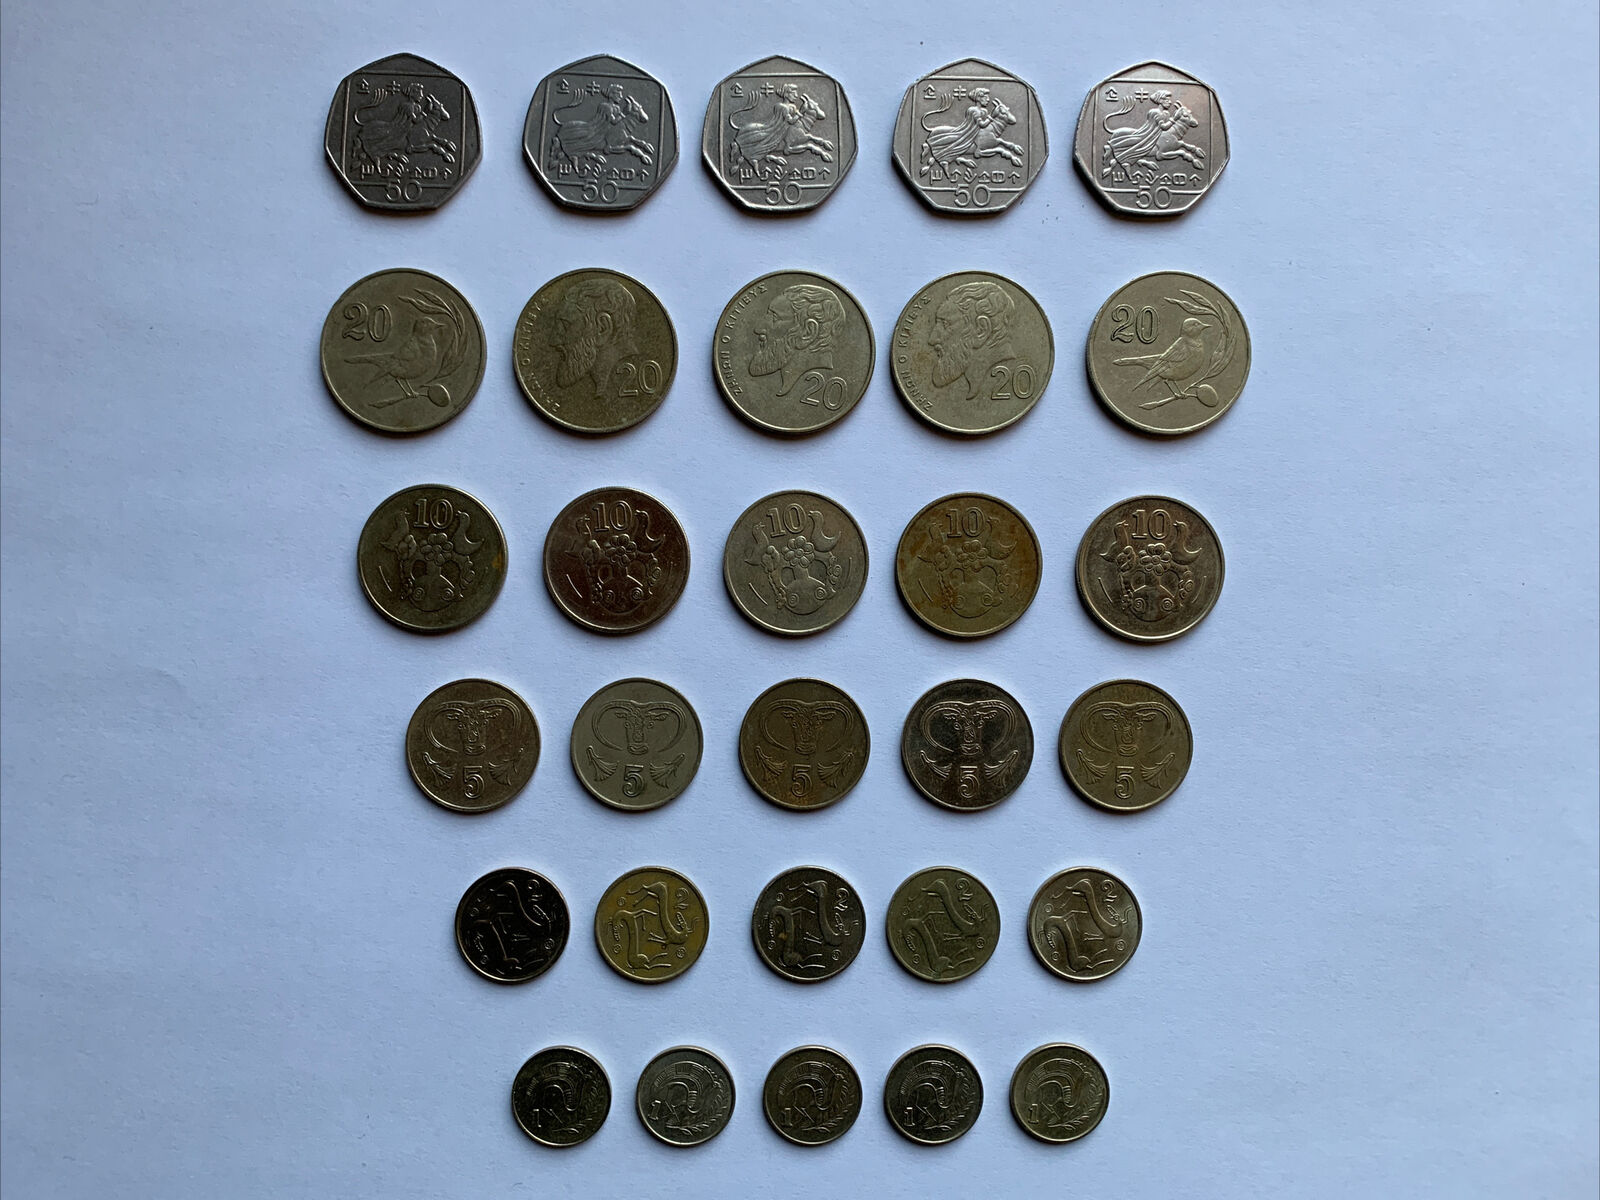 Cyprus Coins, Lot Of 30 Coins 50,20,10,5,2,1 Cents 1985-2004 Vintage.